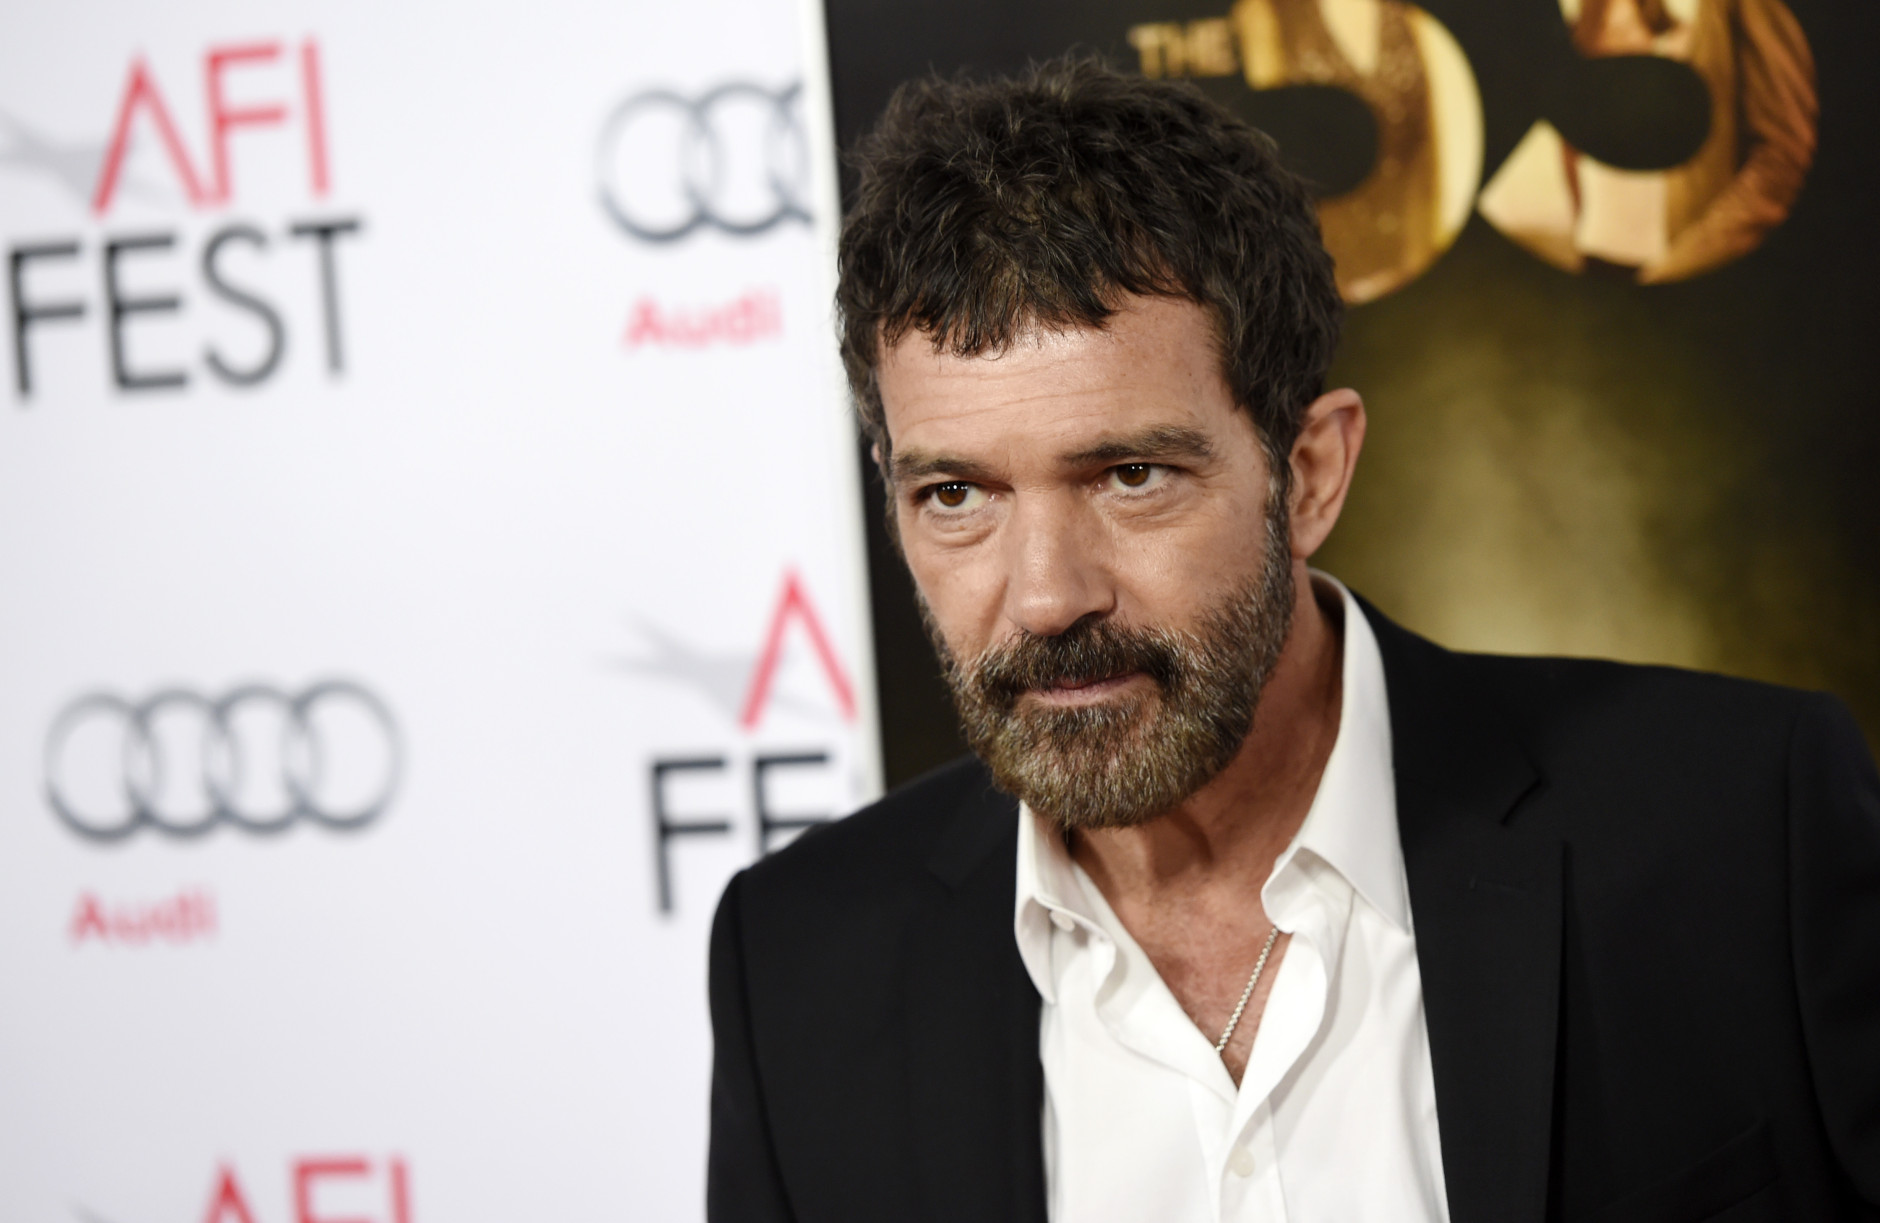 Antonio Banderas, a cast member in "The 33," poses at a gala screening of the film during the 2015 AFI Fest at the TCL Chinese Theatre on Monday, Nov. 9, 2015, in Los Angeles. (Photo by Chris Pizzello/Invision/AP)